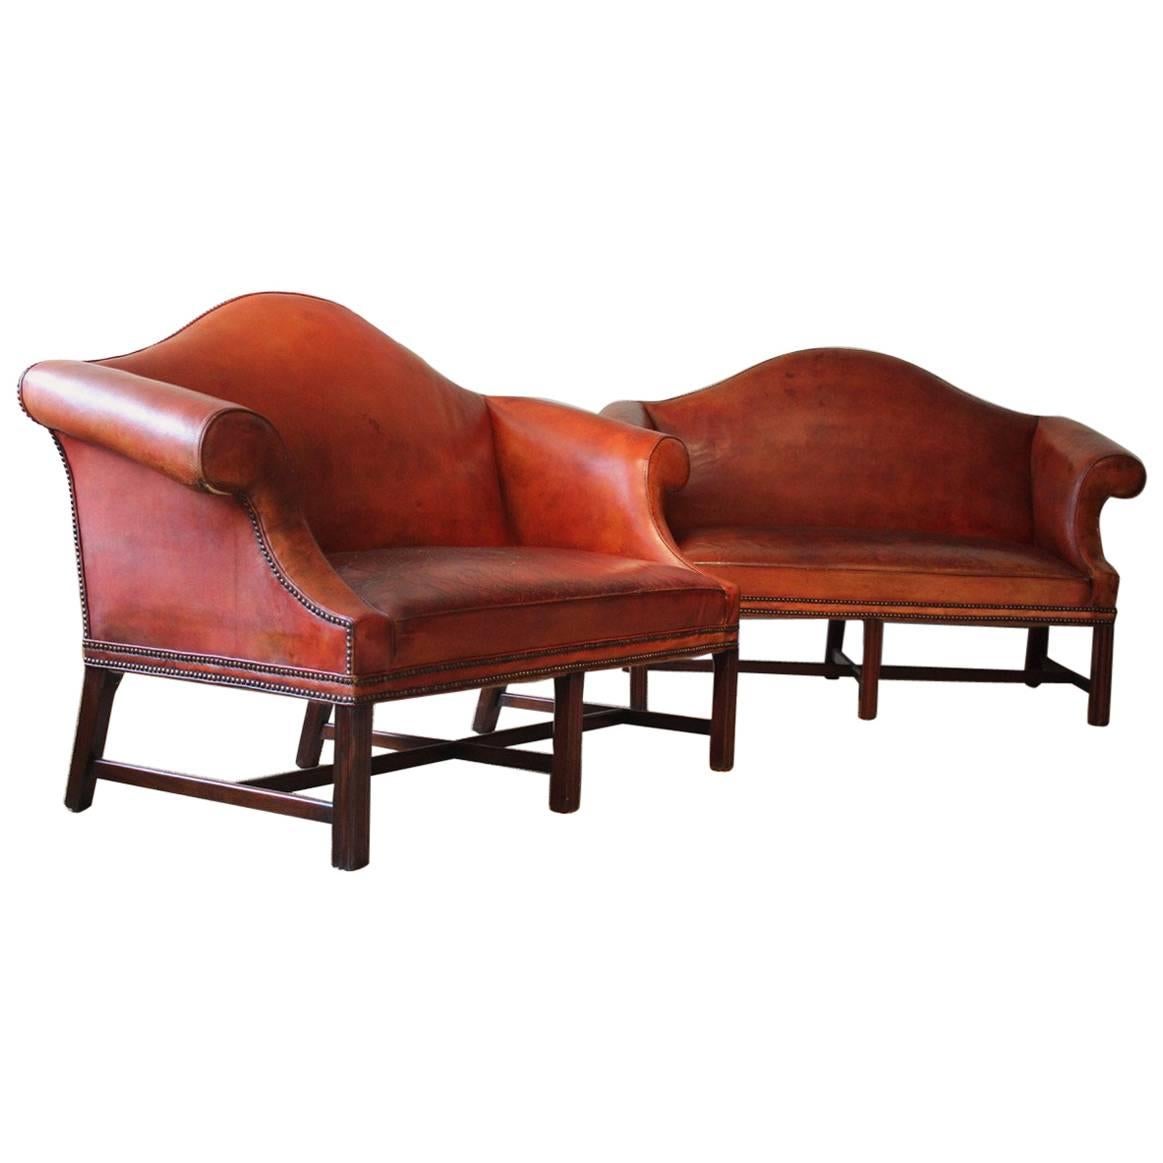 Pair of Early to Mid-20th Century English Humpback Leather Sofas